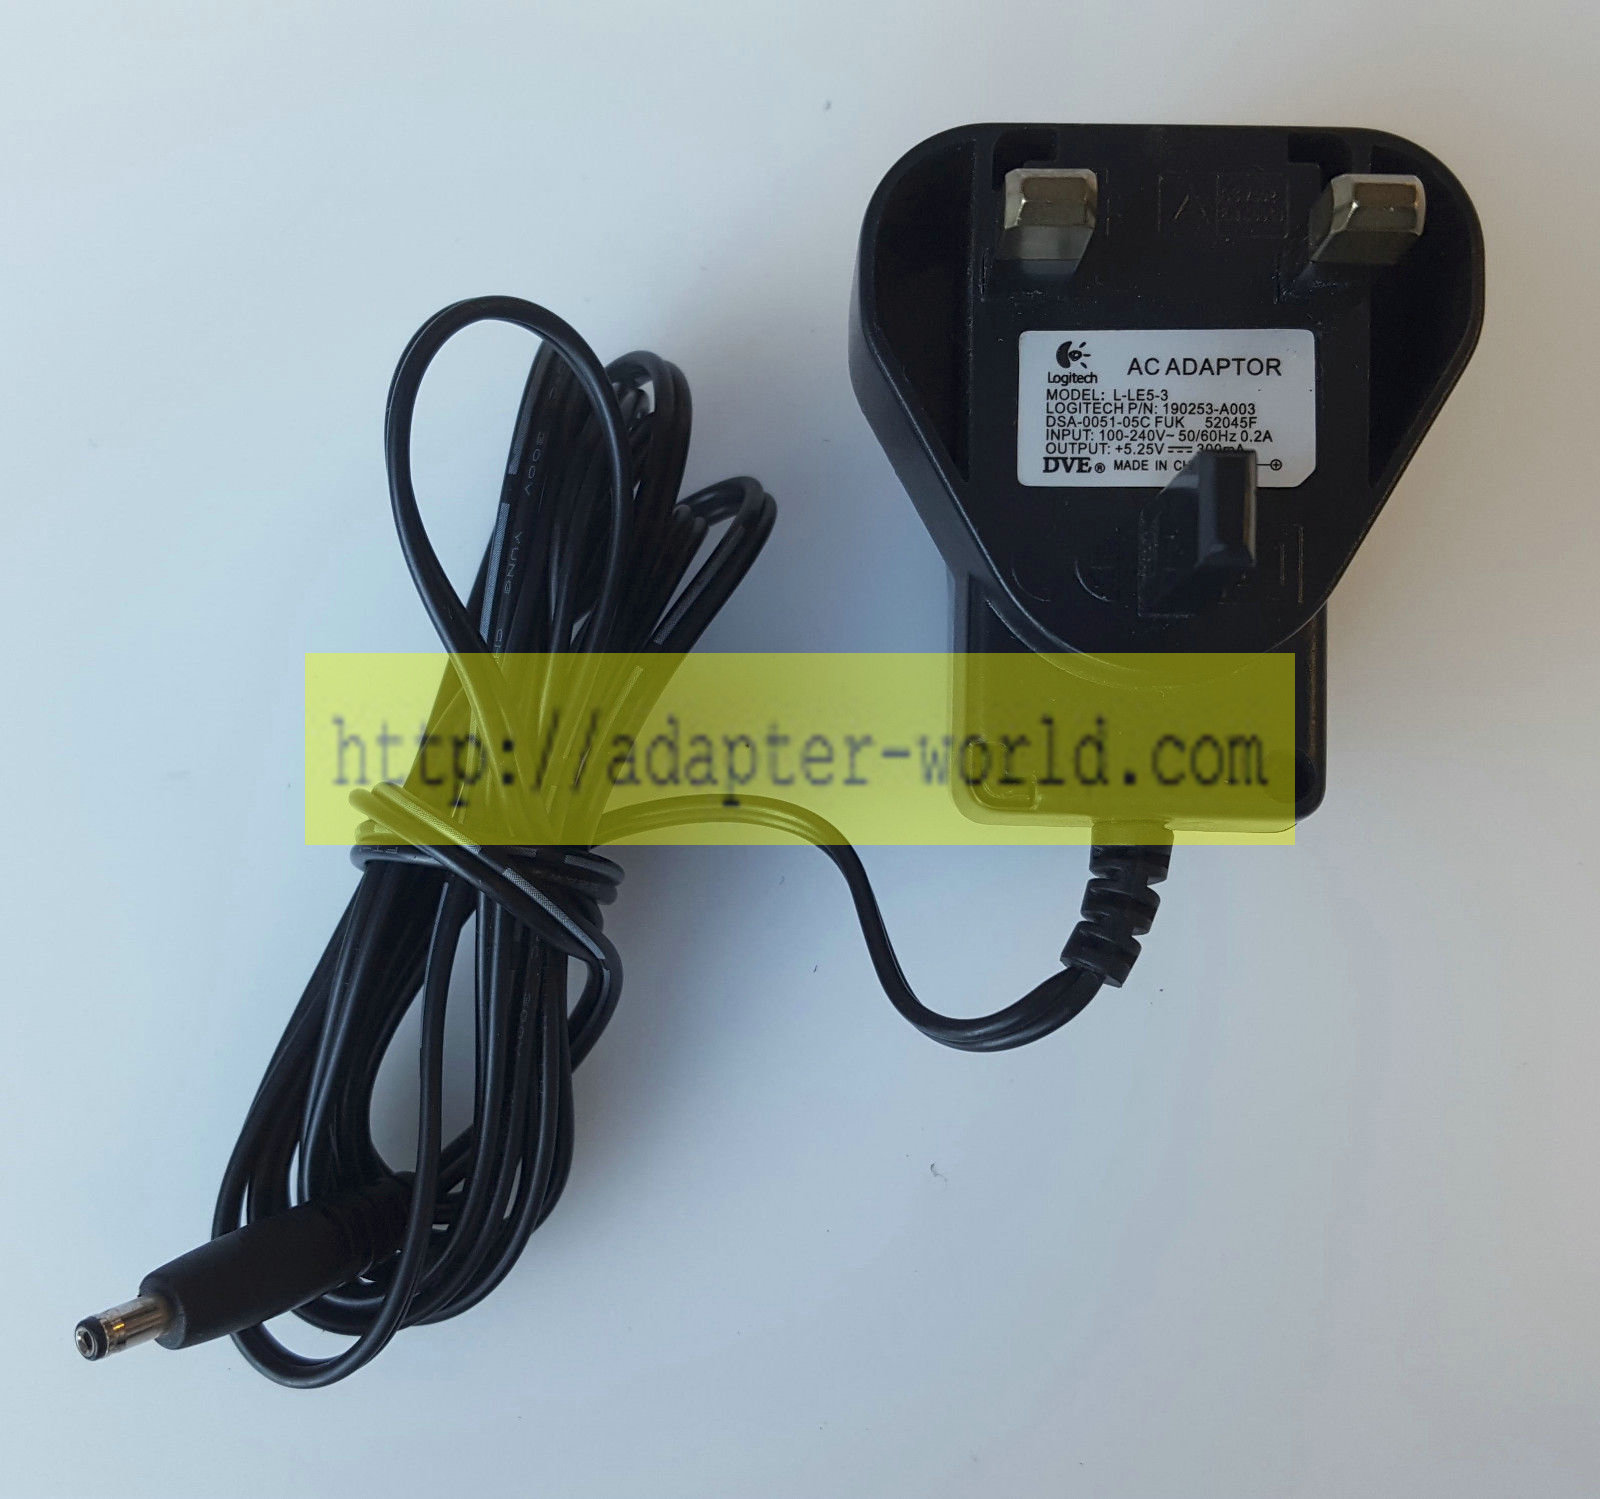 *Brand NEW*LOGITECH 190253-A003 L-LE5-3 5.25V 300mA AC/DC ADAPTER POWER SUPPLY